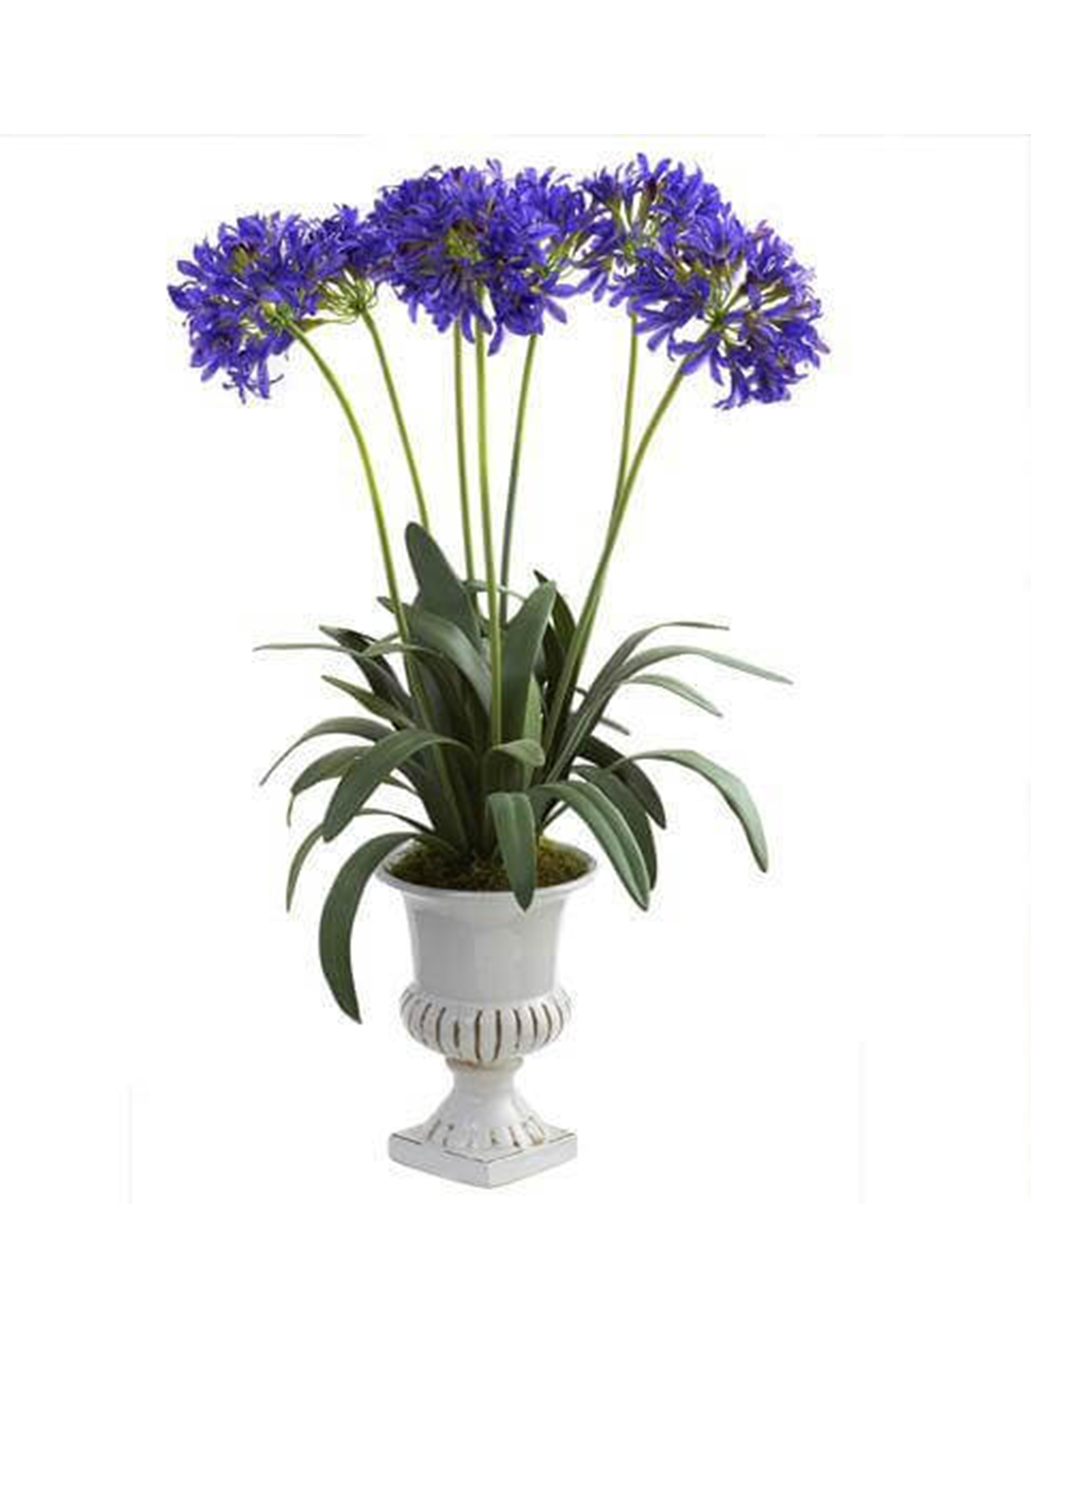 Agapanthus African, African Lily